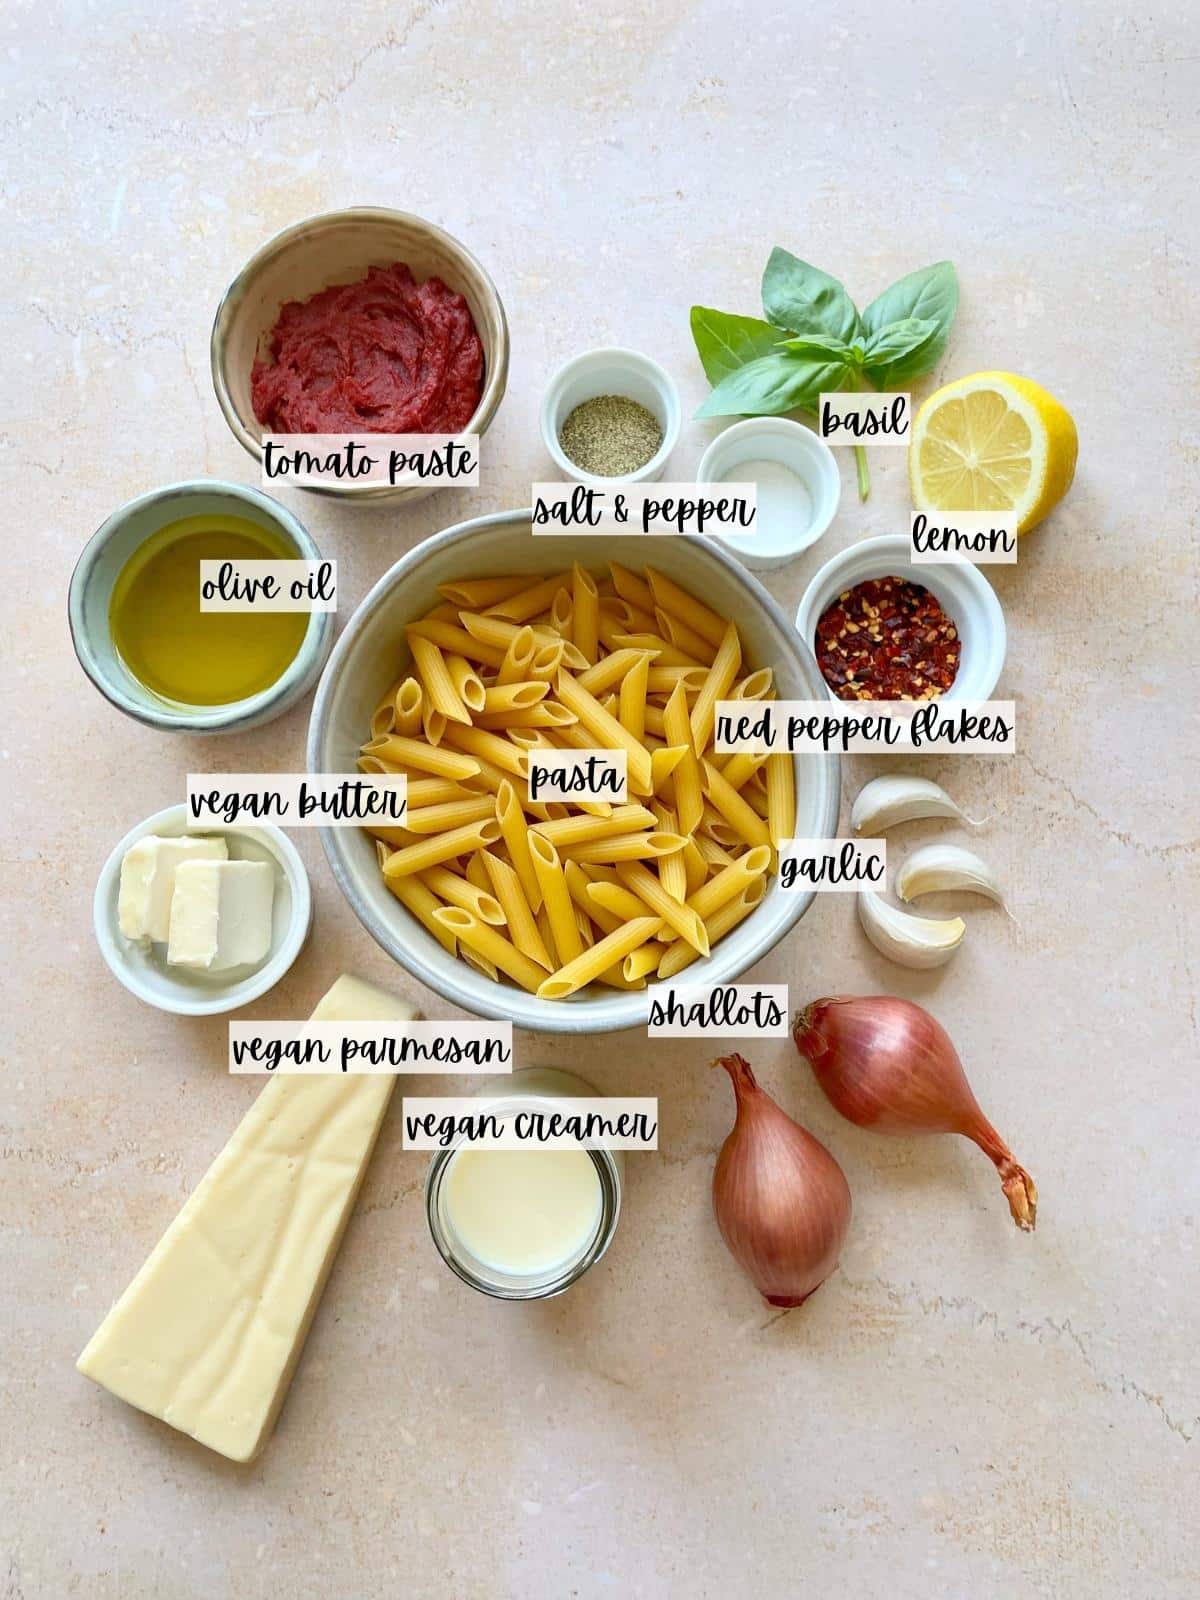 Labeled ingredients for spicy vodka pasta.